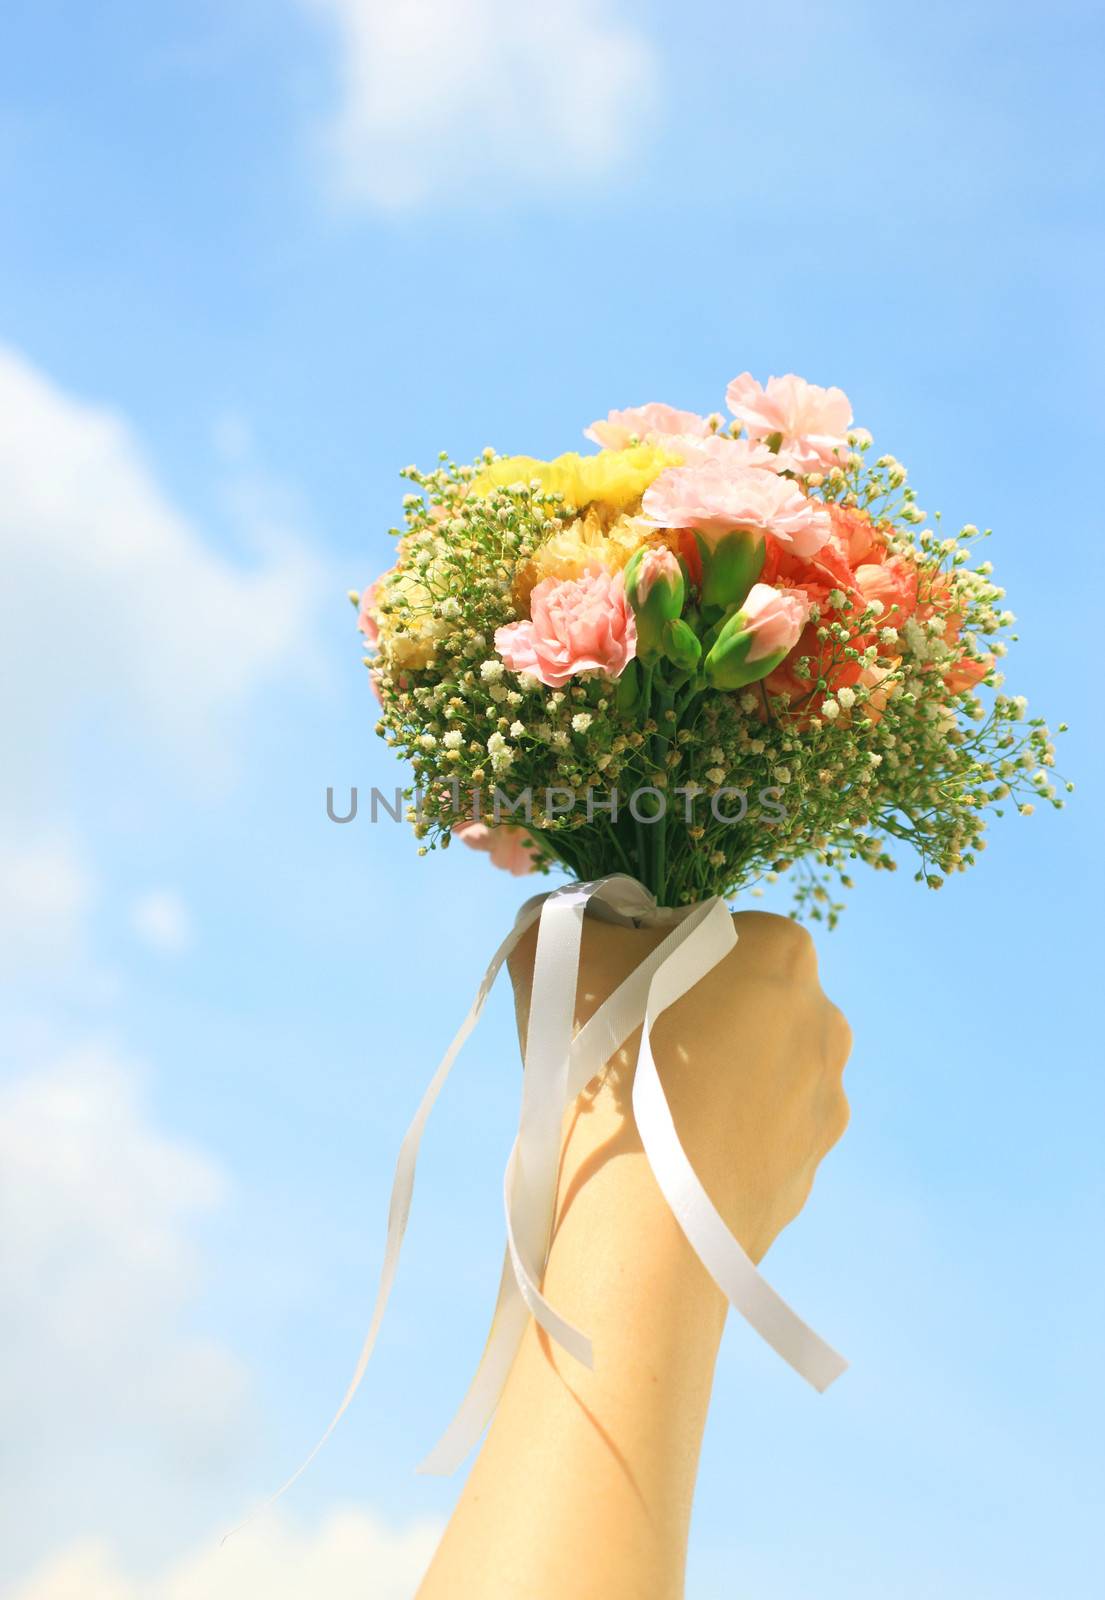 Bouquet of flower in hand and blue sky  by nuchylee